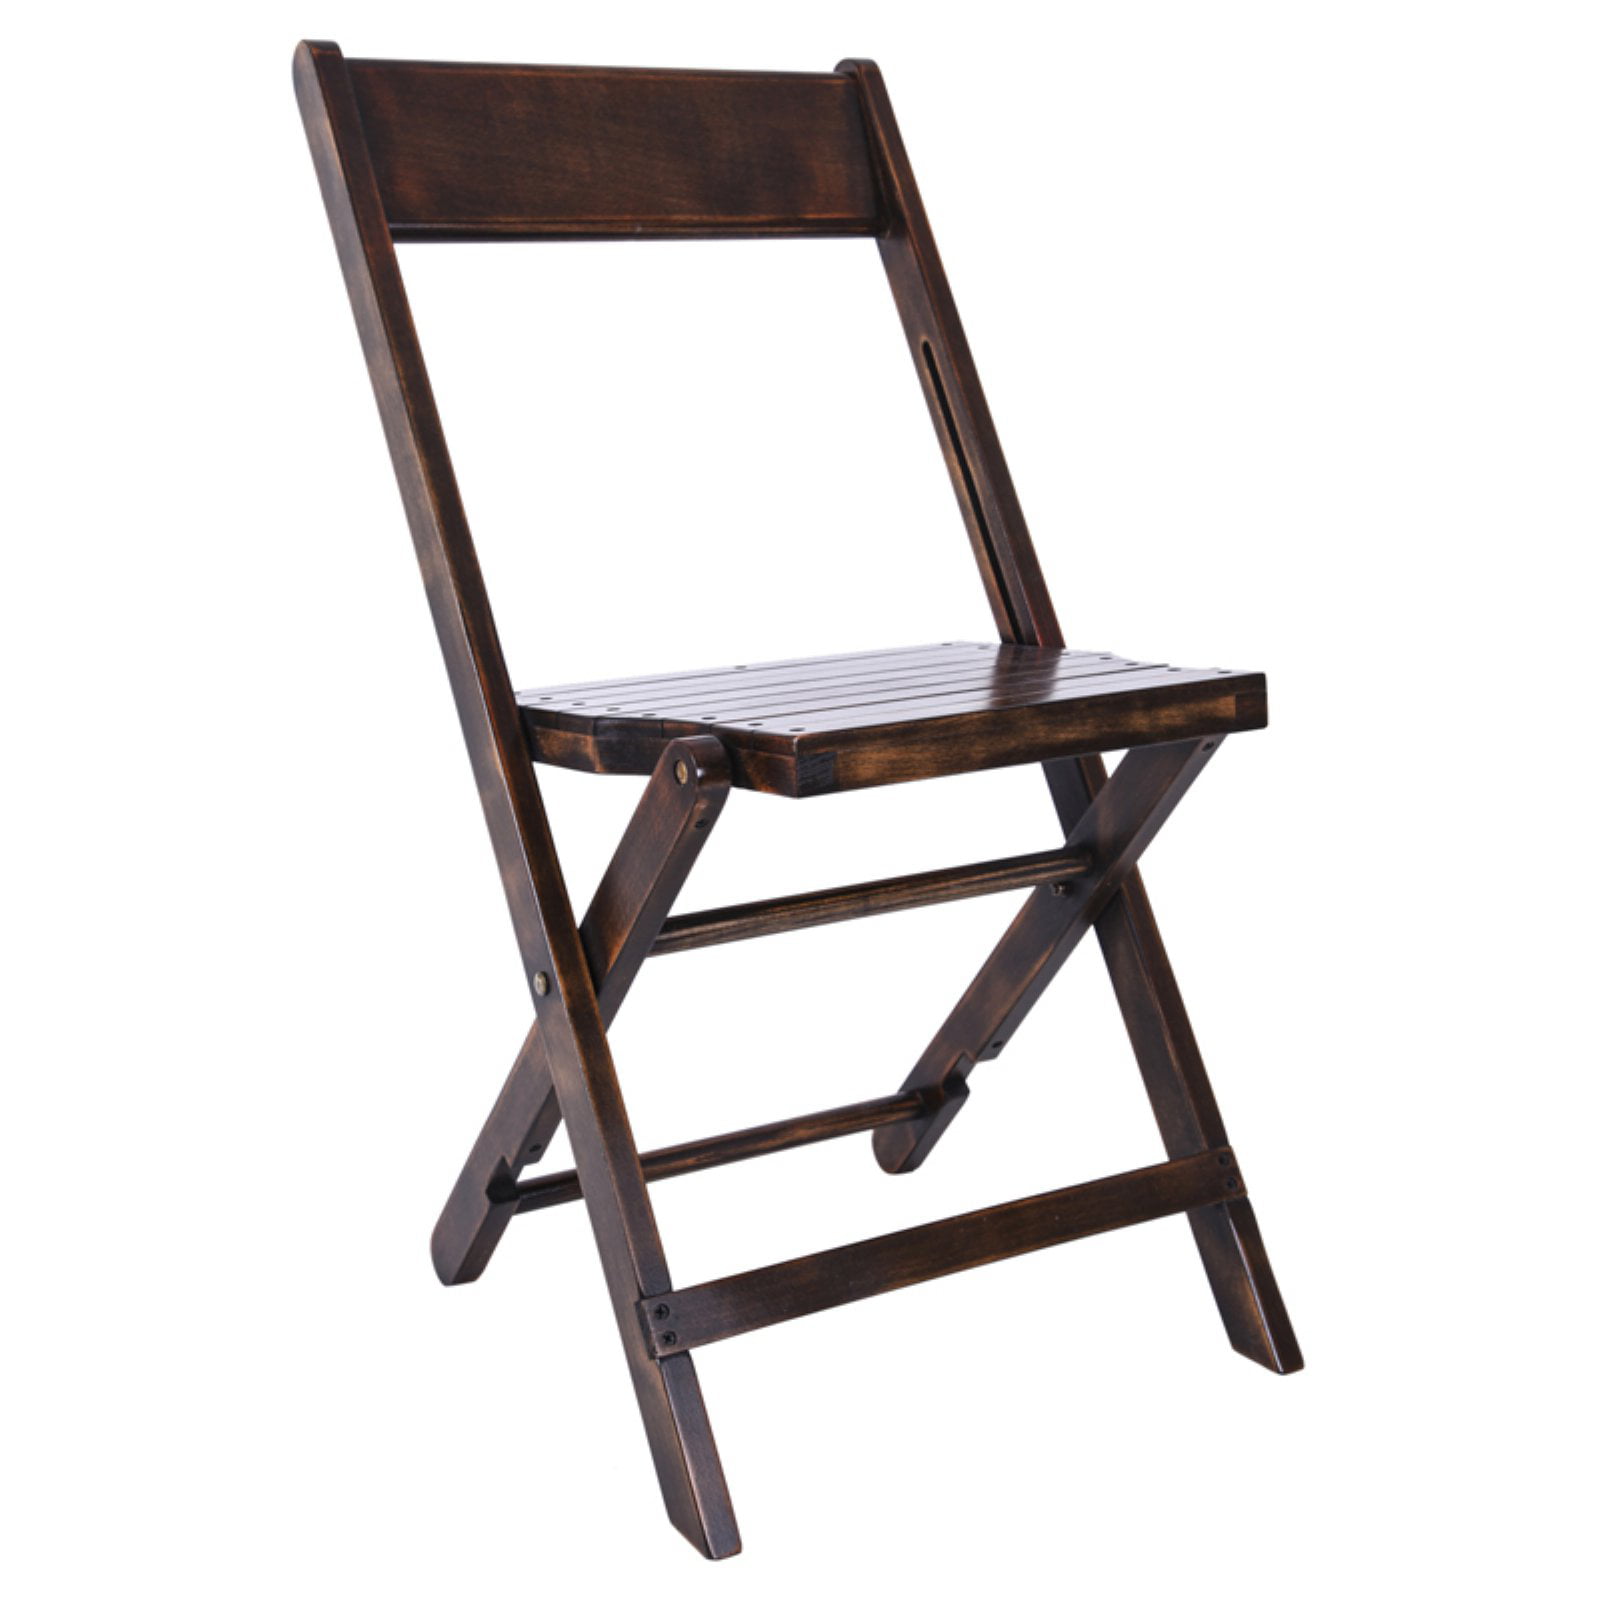 A-102-raw-slatted Natural Wood Folding Chair With Slatted Seat - 29.5 In.